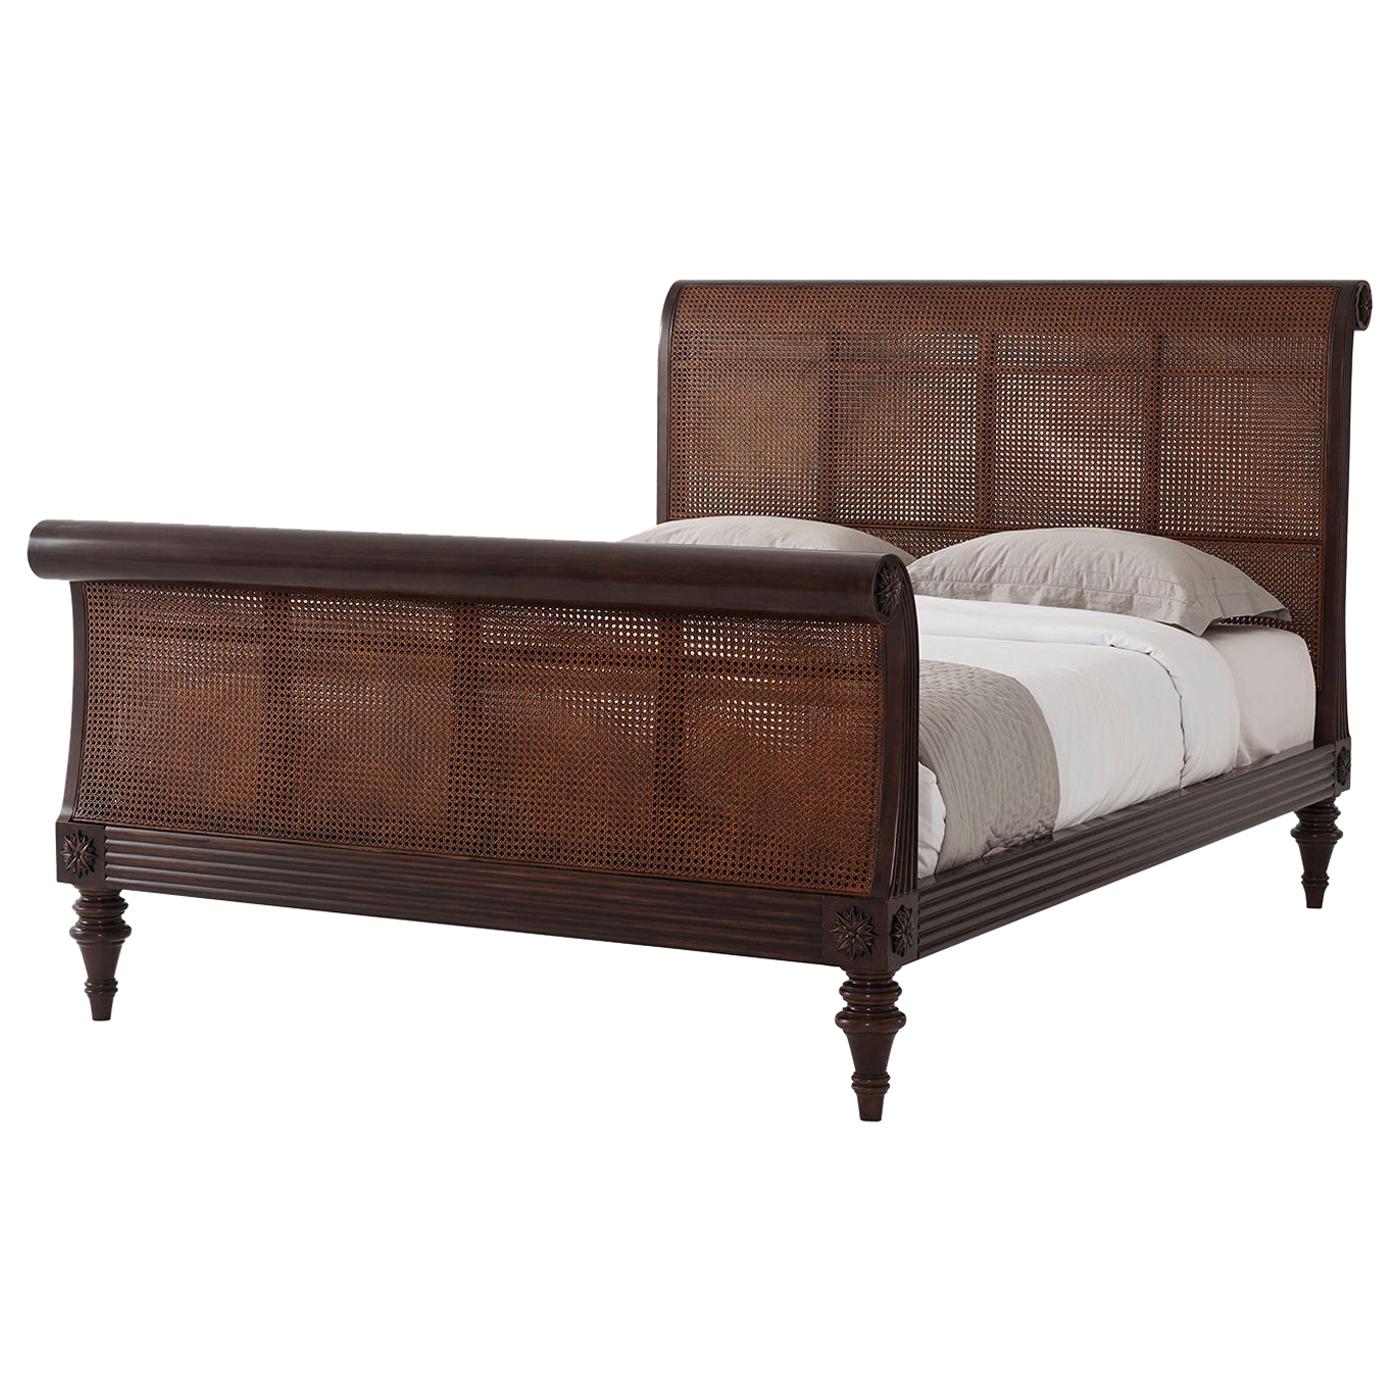 Caned Regency Sleigh Queen Bed For Sale